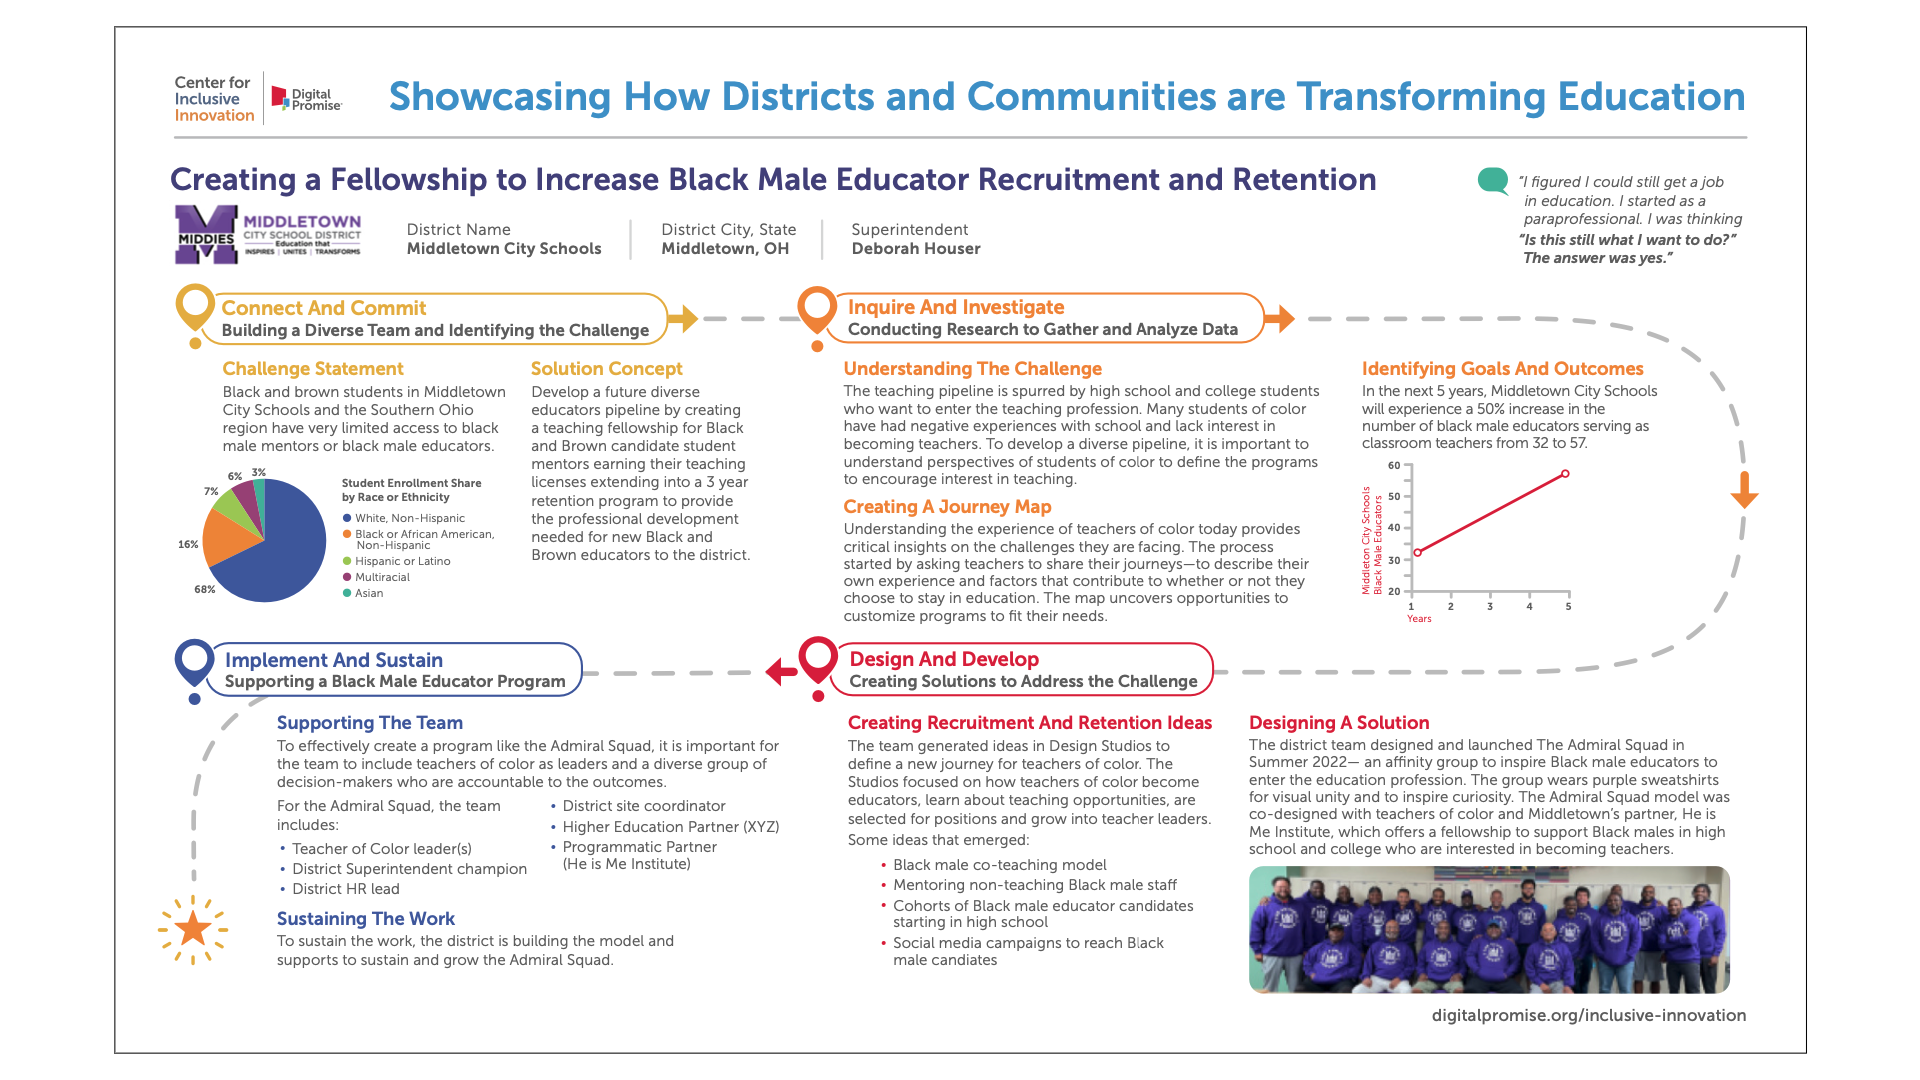 Creating a Fellowship to Increase Black Male Educator recruitment and Retention - Middletown City School District